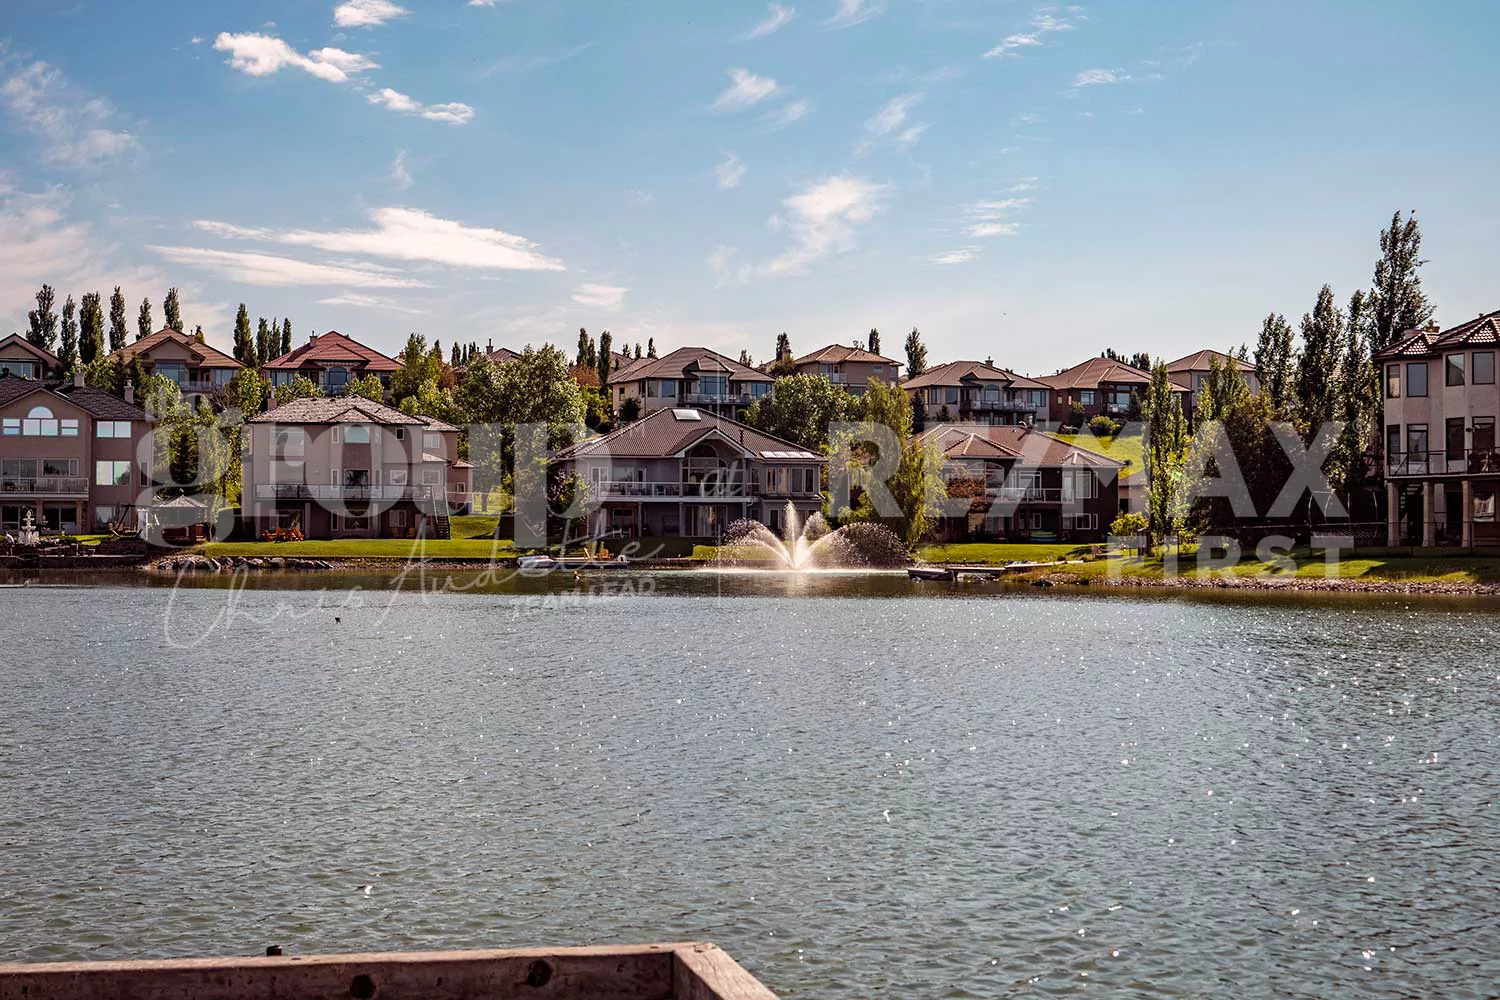 Across the lake view of residential homes in Arbour Lake